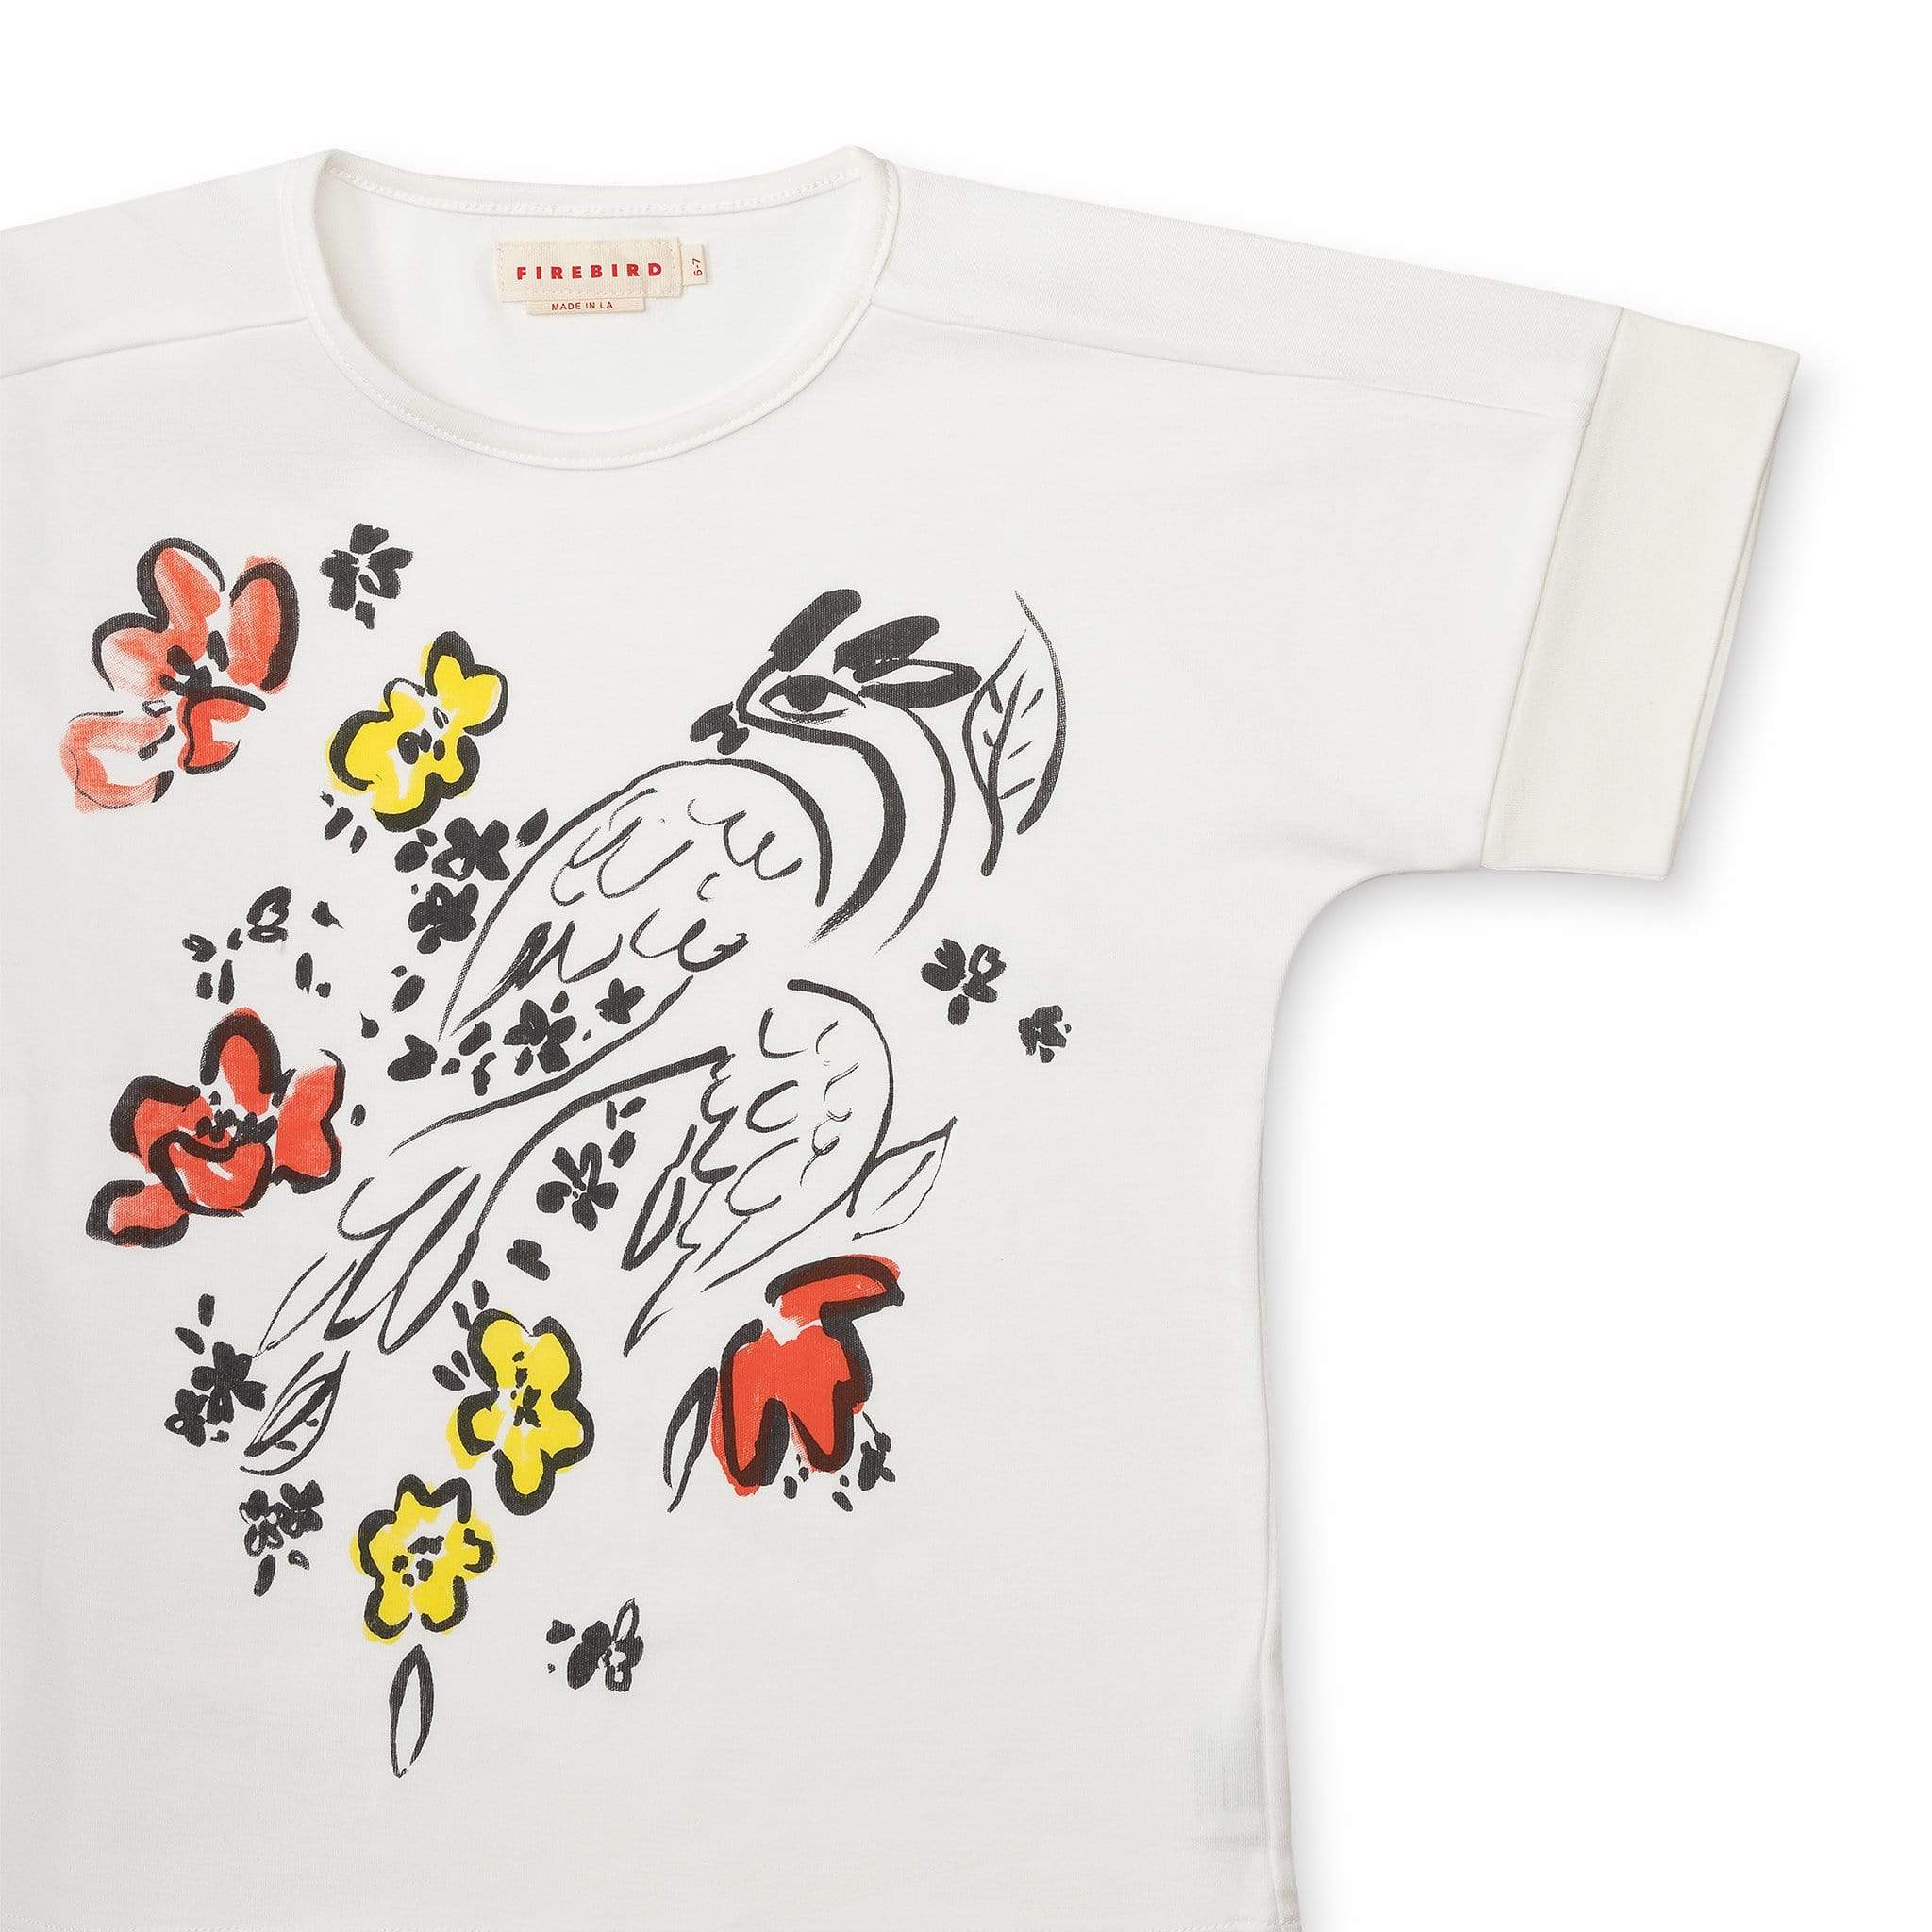 One of our favorite girls graphic tees, featuring a painted Firebird. Artwork inspired by Marc Chagall. Made from 100% organic cotton fabric, cut and sewn in LA. 